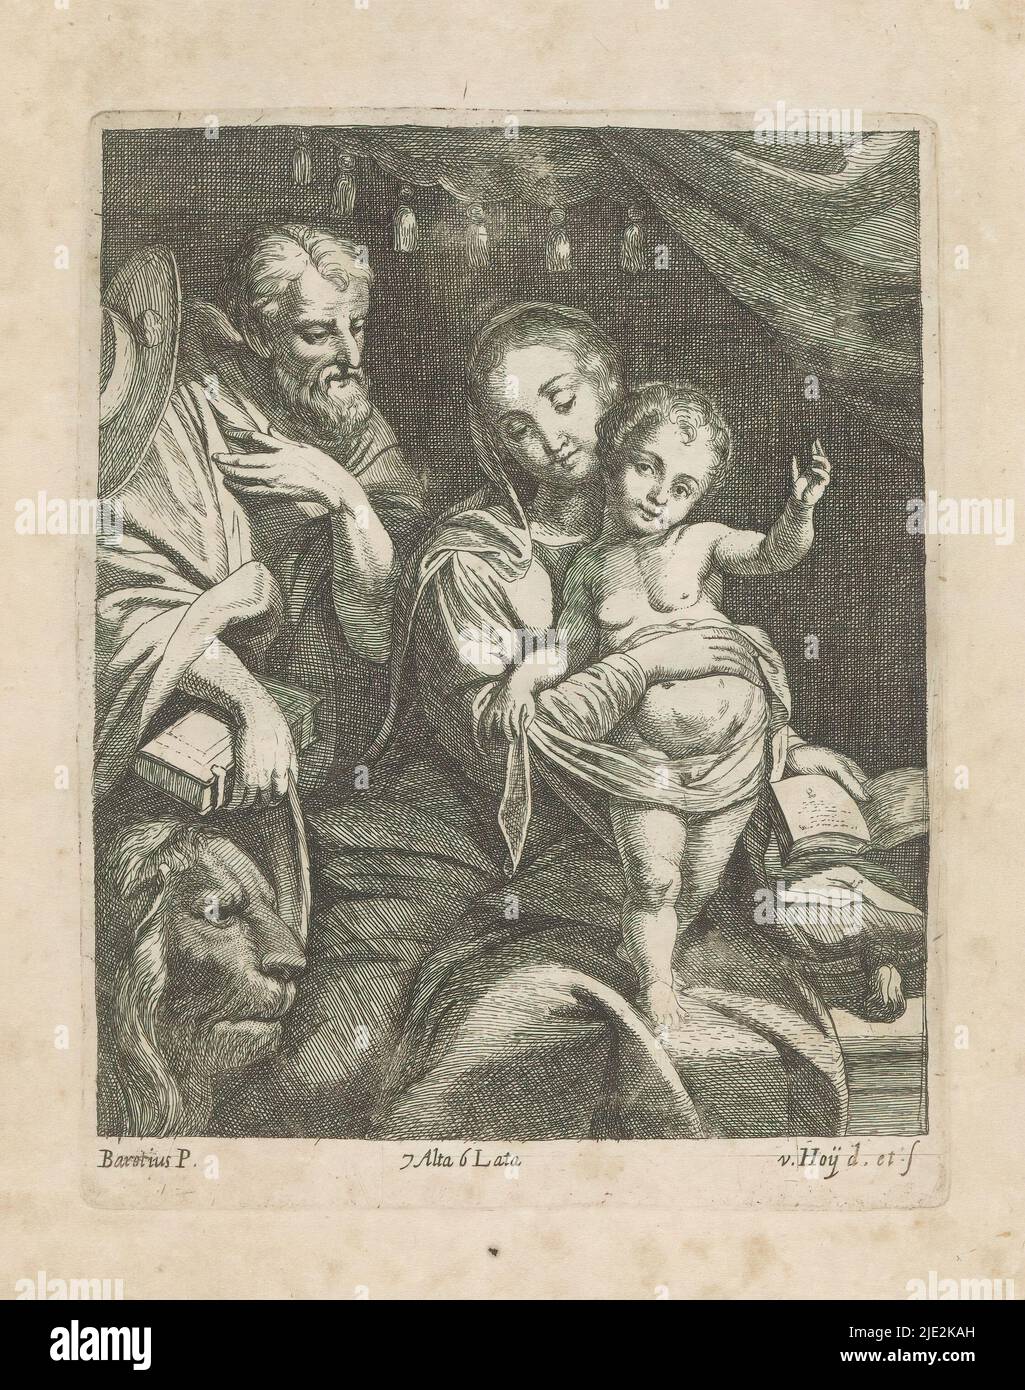 Mary with the Christ Child next to St. Jerome, Mary showing an opened book. This print is part of an album., print maker: Nikolaas van Hoy, (mentioned on object), after drawing by: Nikolaas van Hoy, (mentioned on object), after painting by: Federico Barocci, (mentioned on object), print maker: Vienna, after drawing by: Vienna, after painting by: Italy, publisher: Brussels, 1660, paper, etching, height 174 mm × width 139 mm Stock Photo